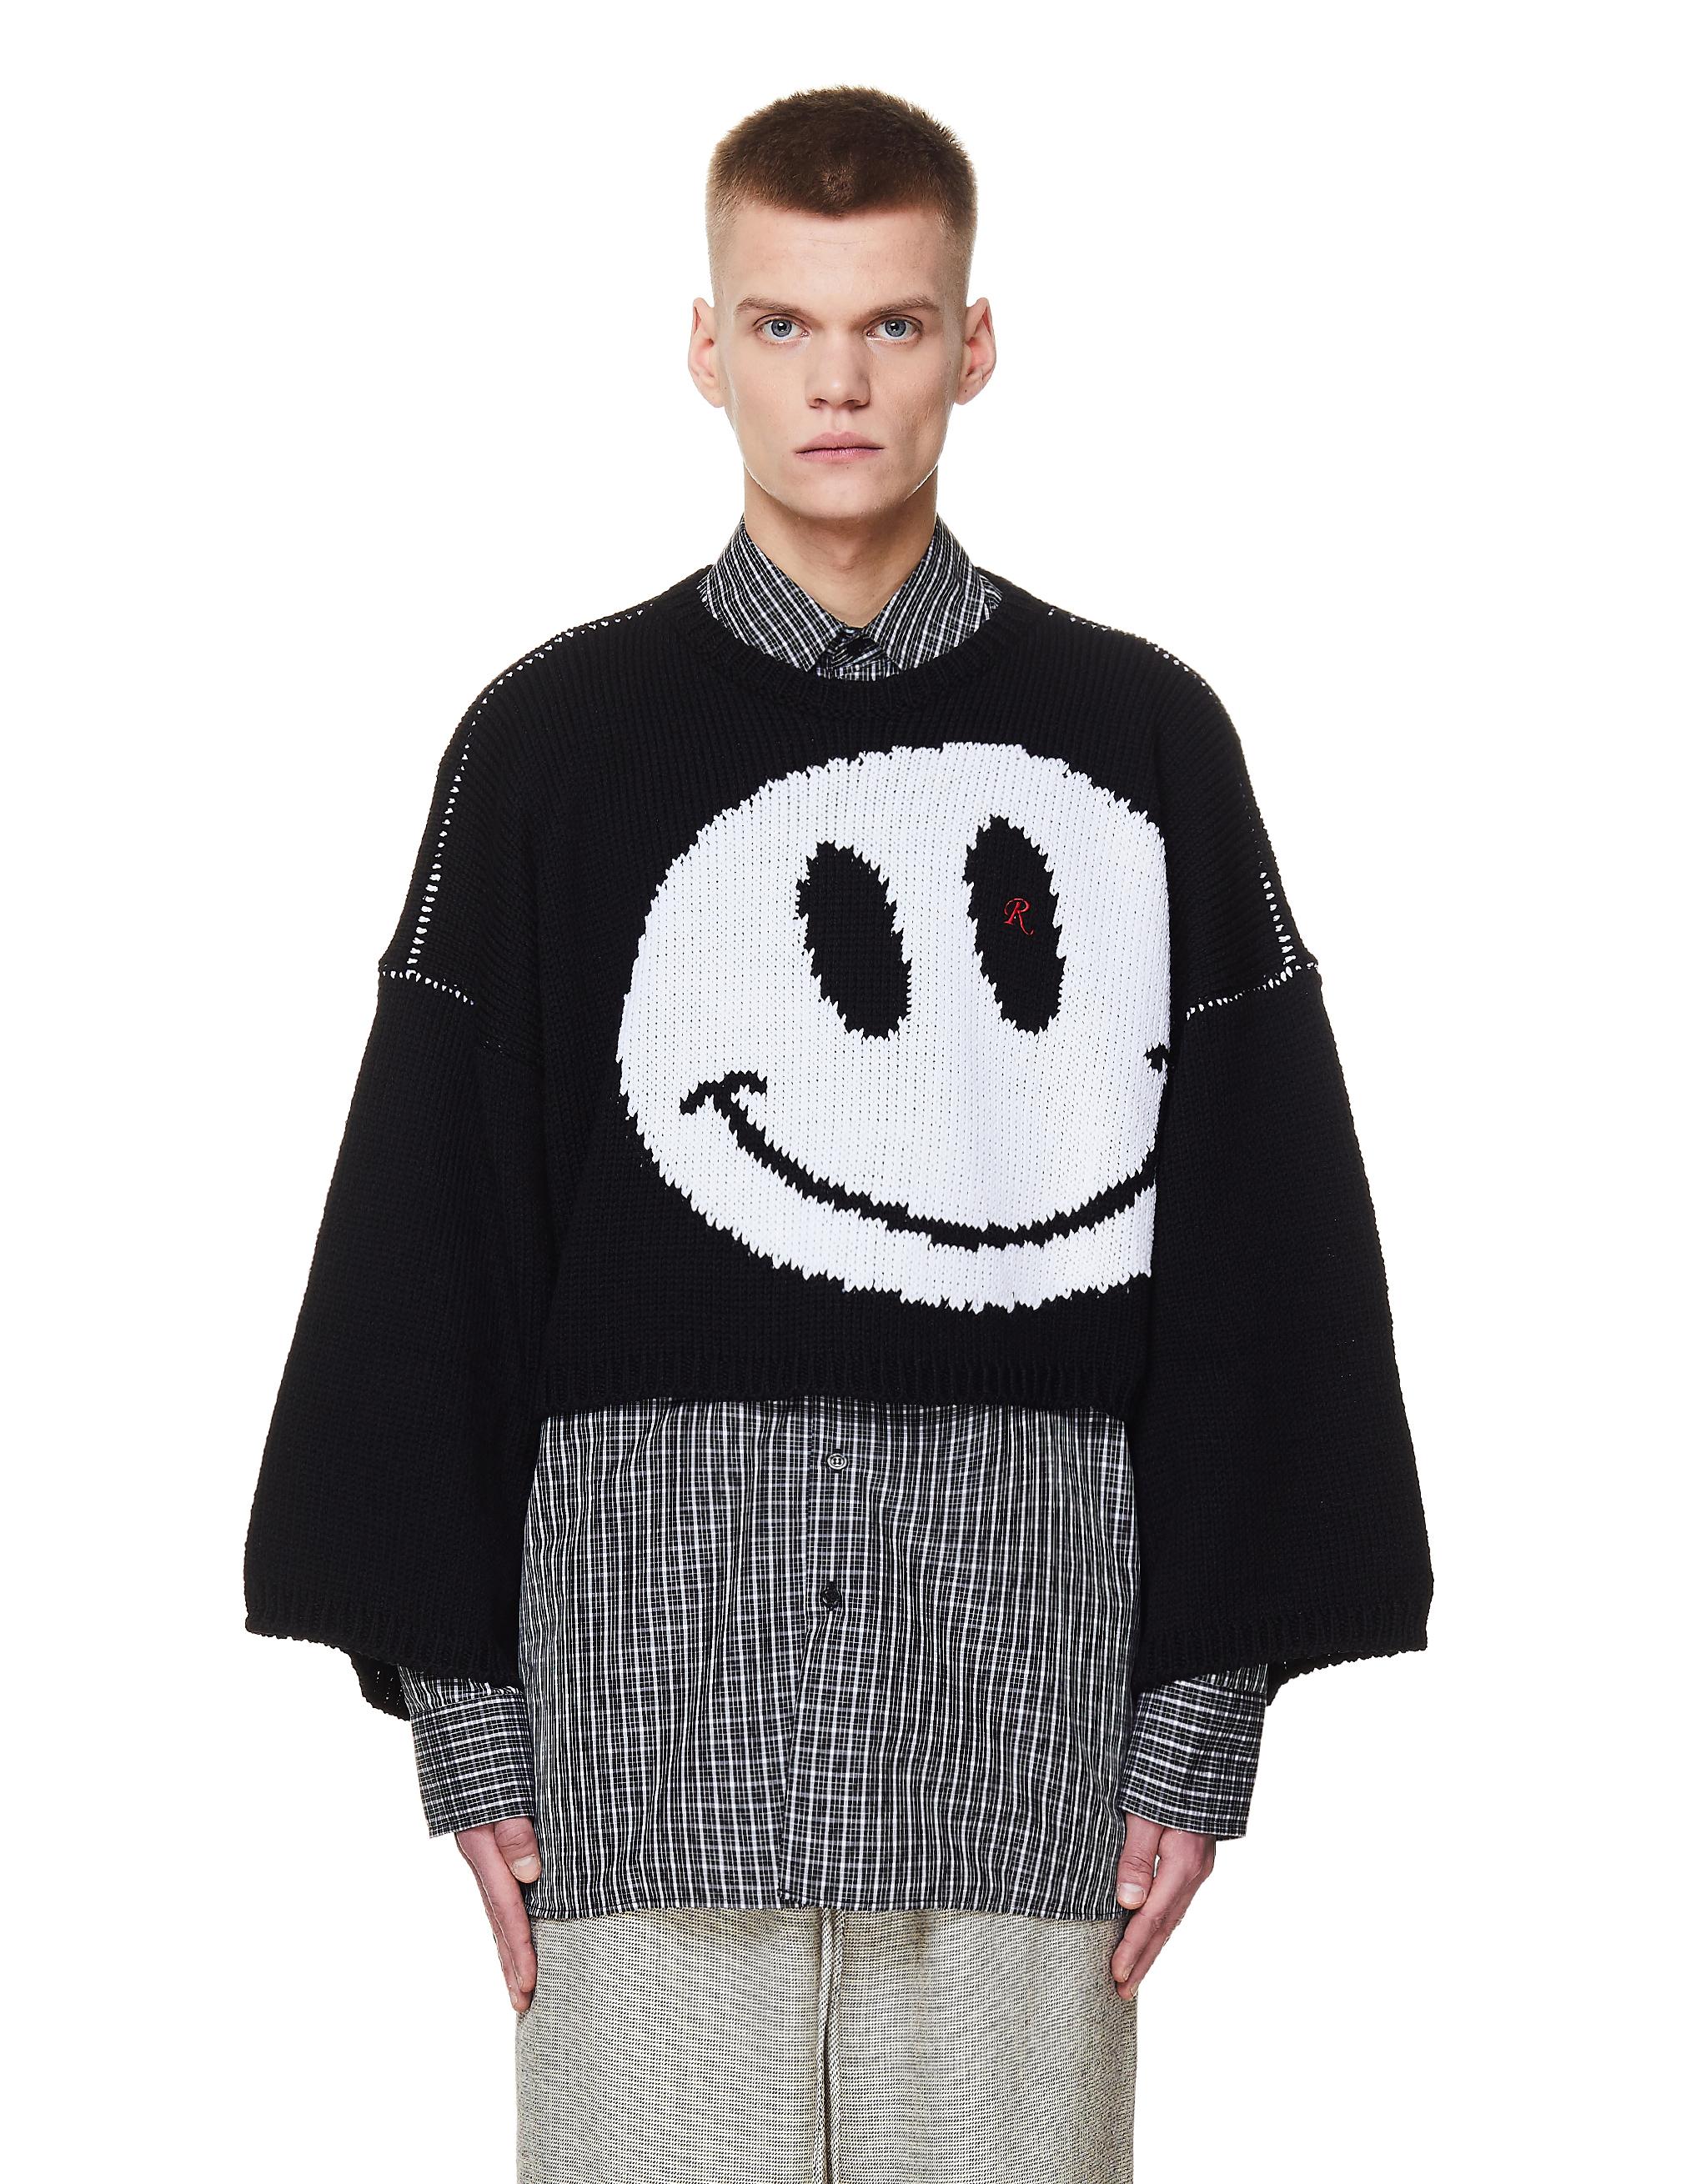 Raf Simons Wool Smiley Face Jacquard Oversized Sweater in Black 